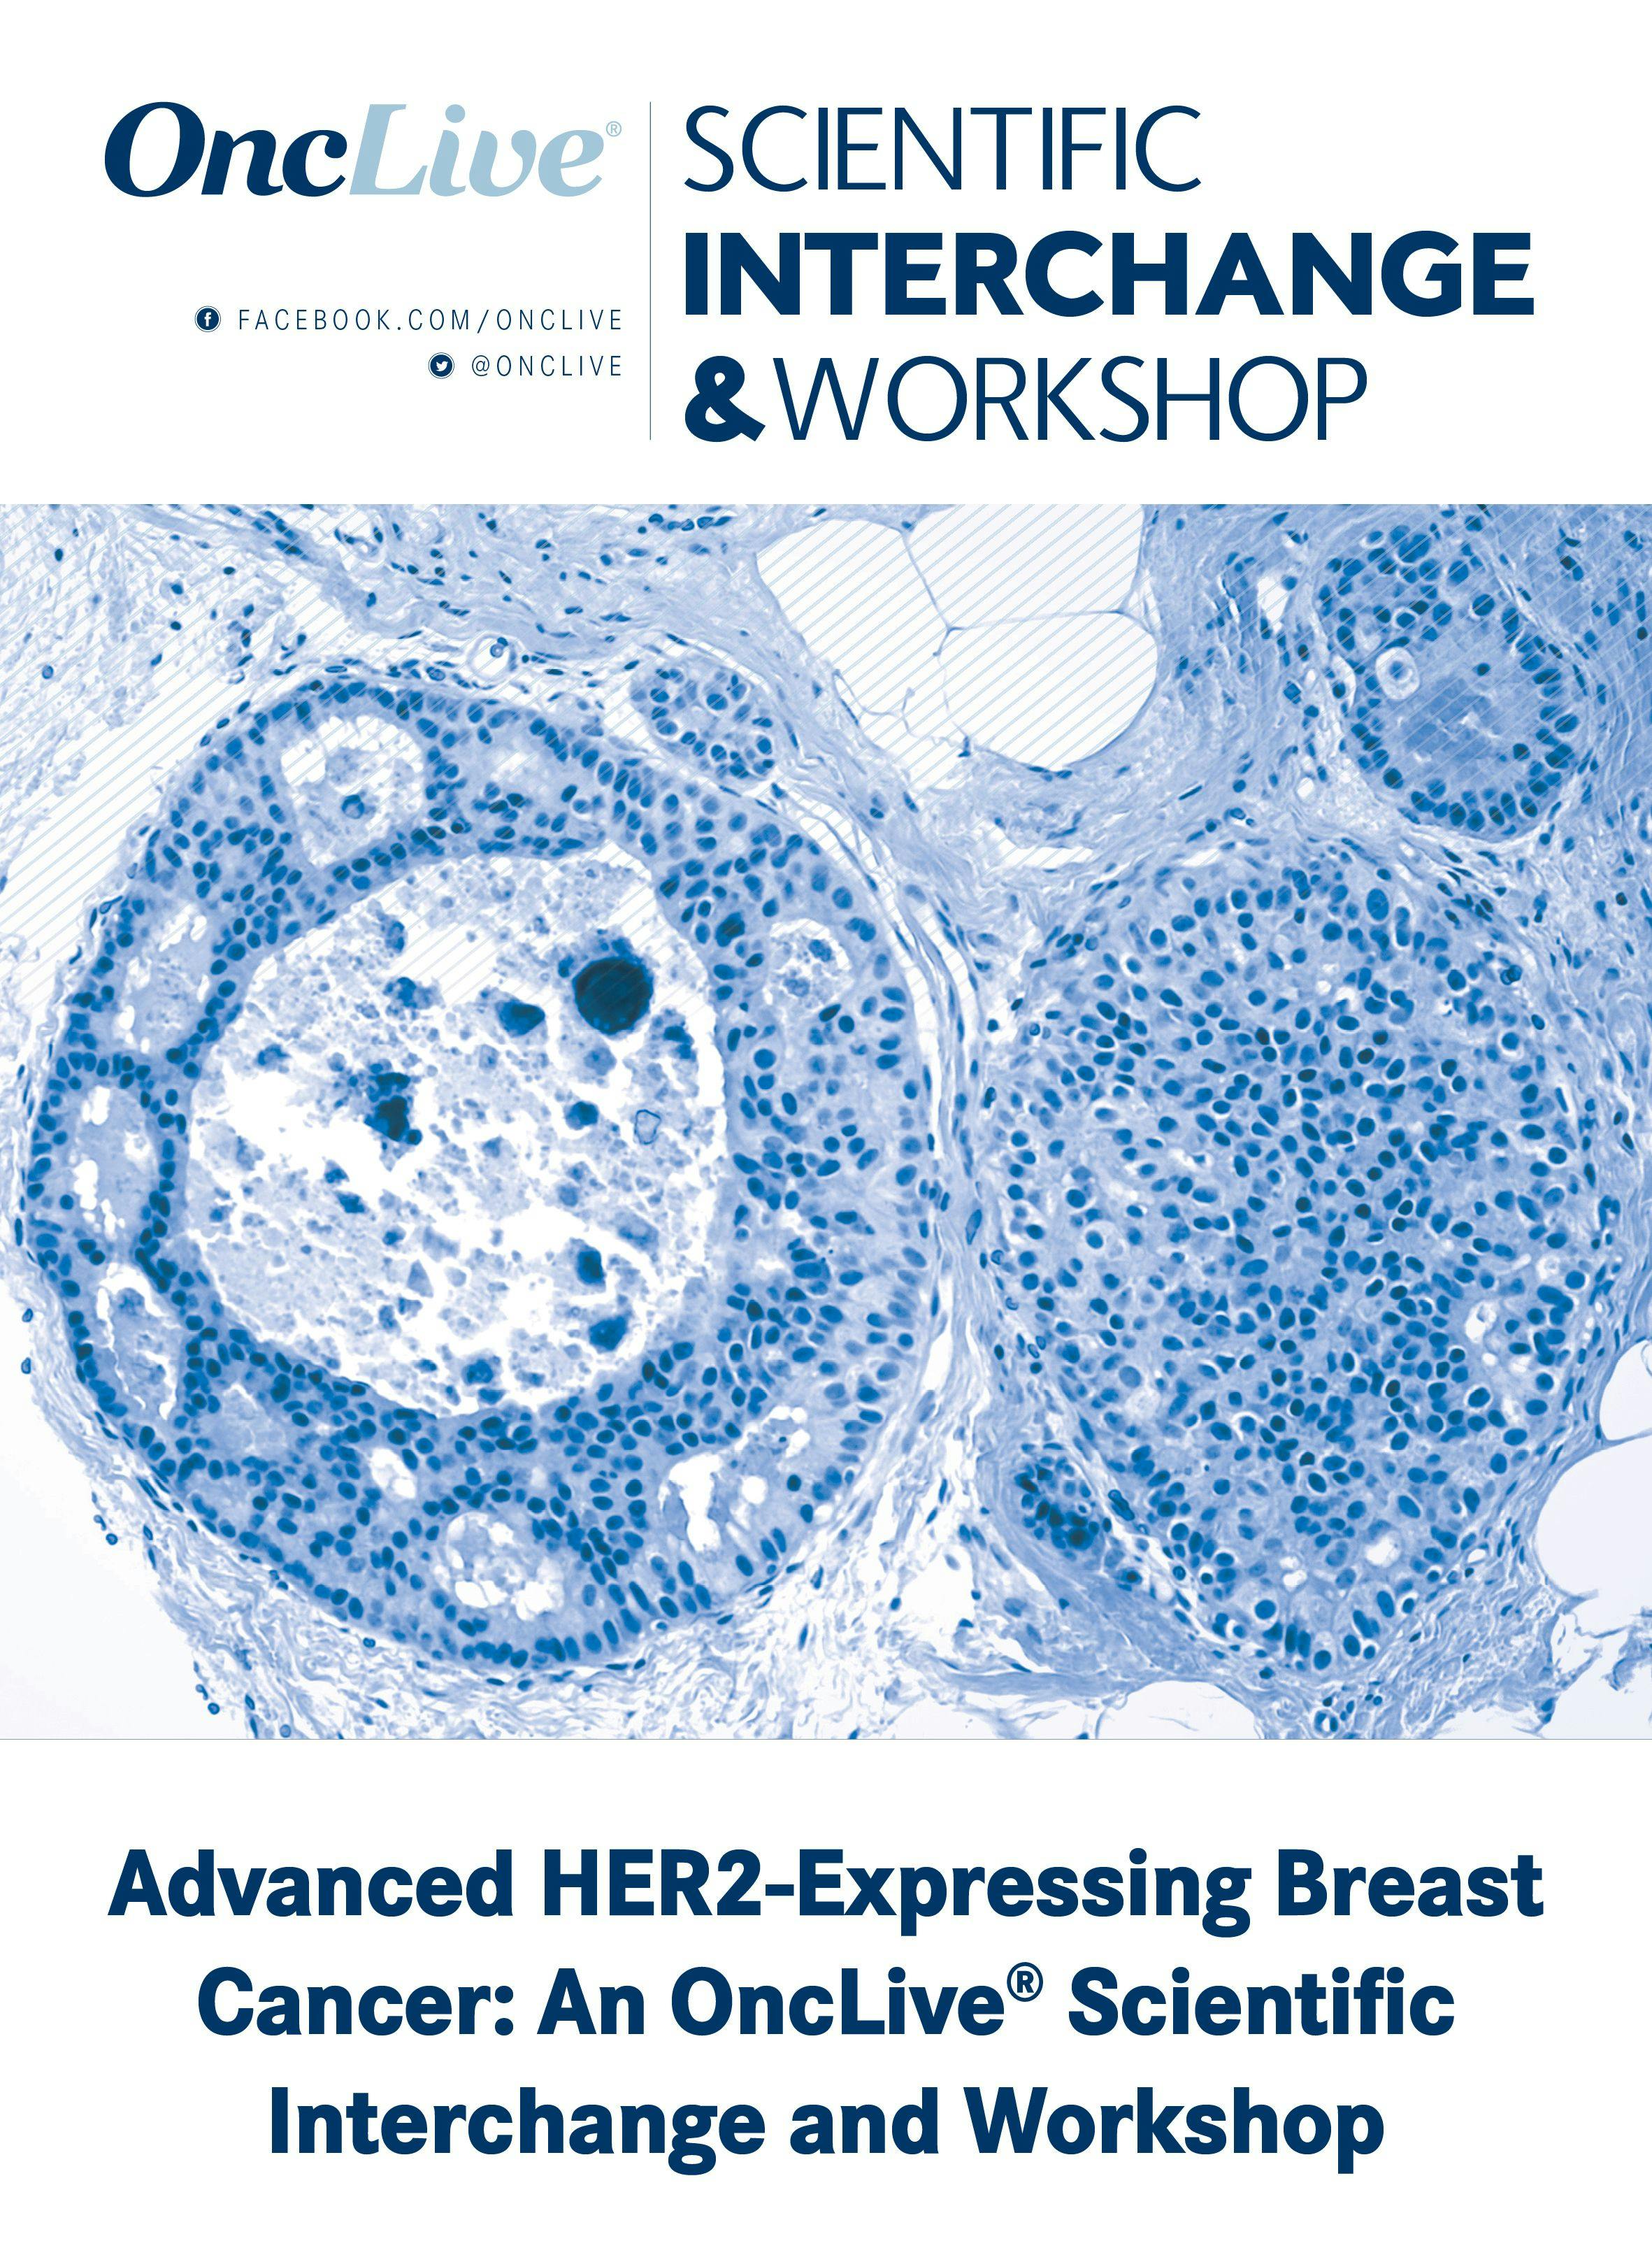 Advanced HER2-Expressing Breast Cancer: An OncLive® Scientific Interchange and Workshop